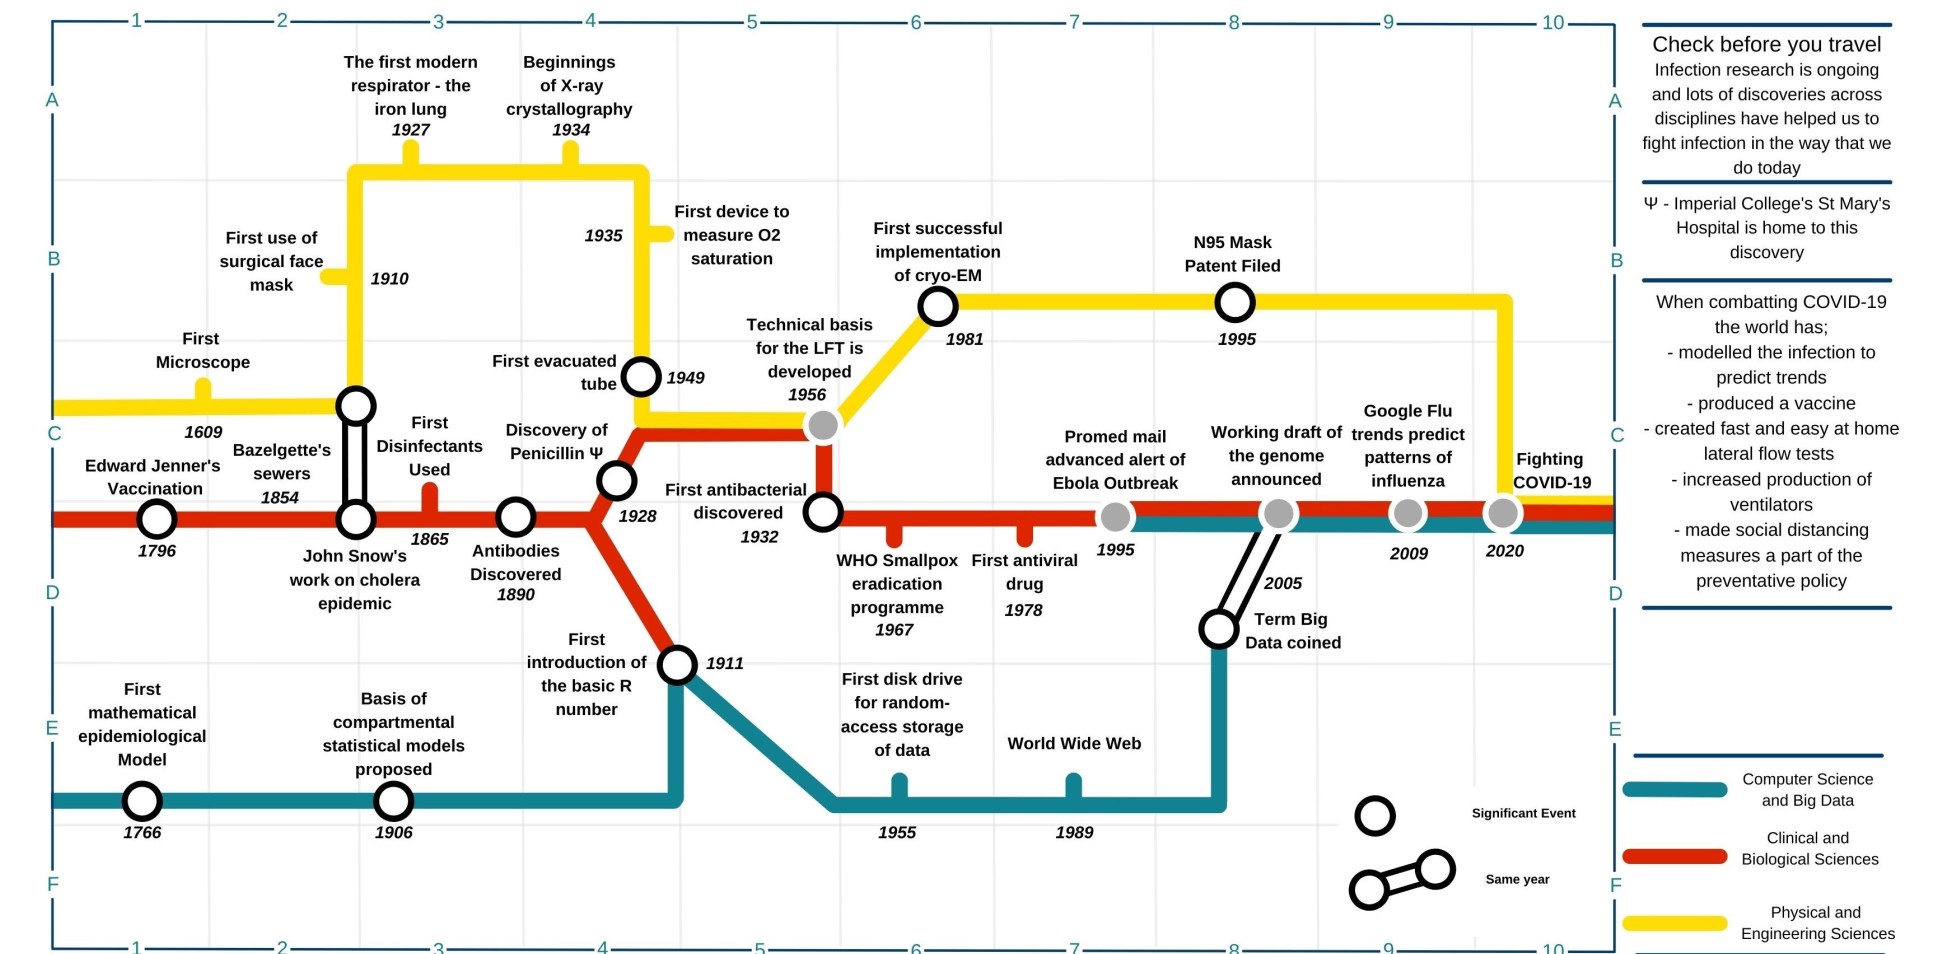 A timeline of key events and discoveries in infectious disease research in Clinical and Biological Sciences, Physical and Engineering Sciences and Computer Science and Big Data.